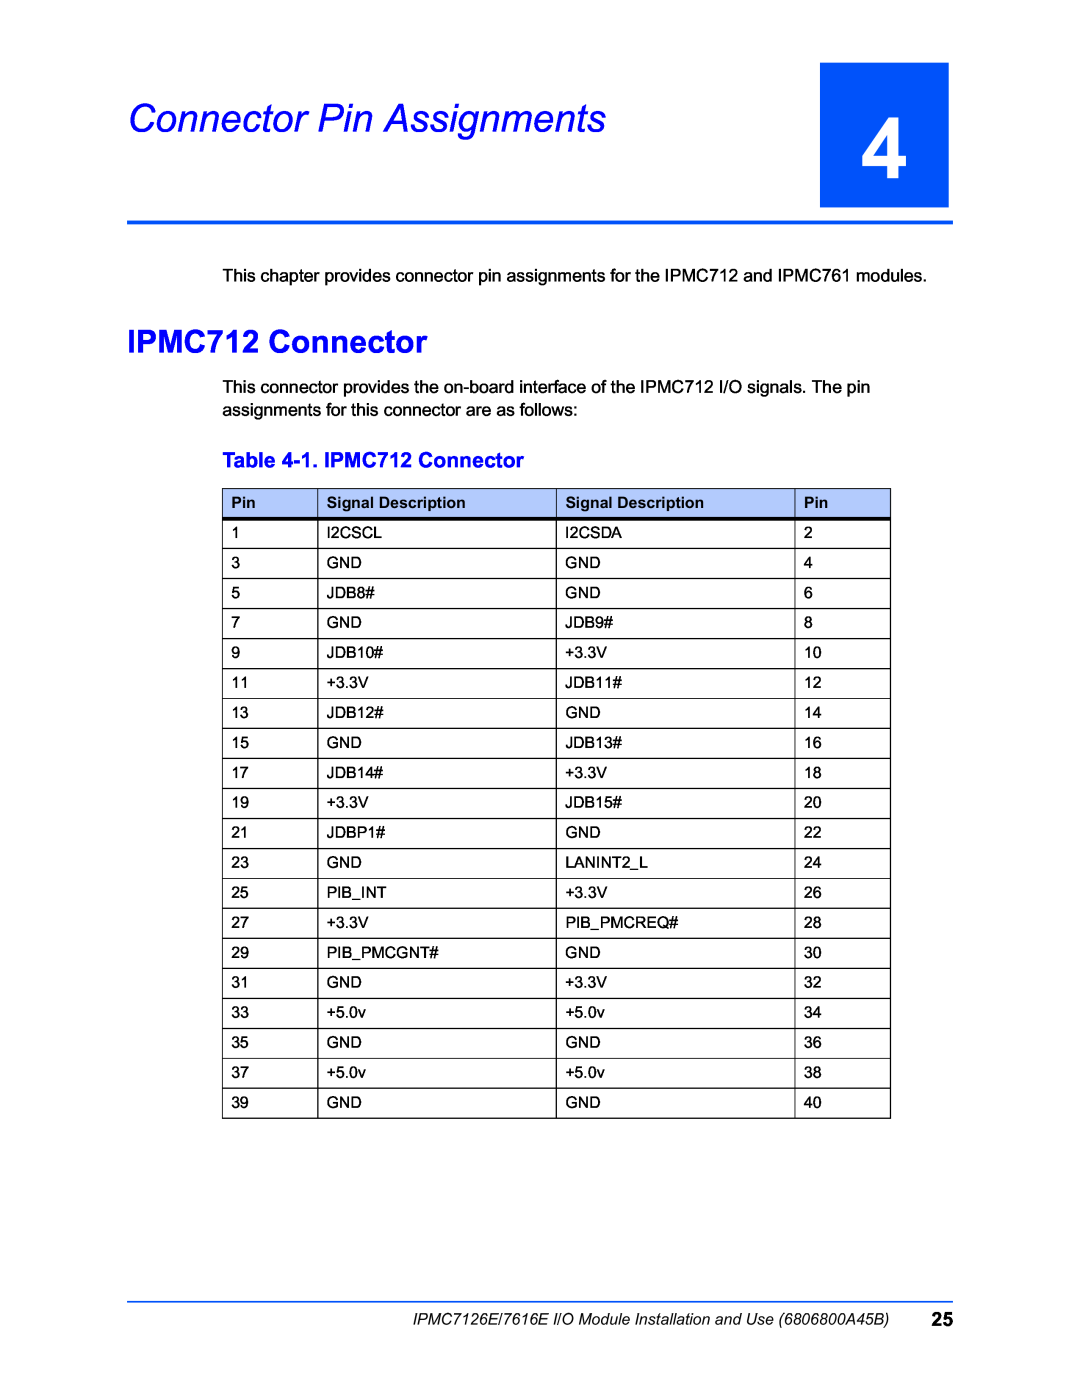 Emerson IPMC7126E, IPMC7616E manual Connector Pin Assignments, 1. IPMC712 Connector 